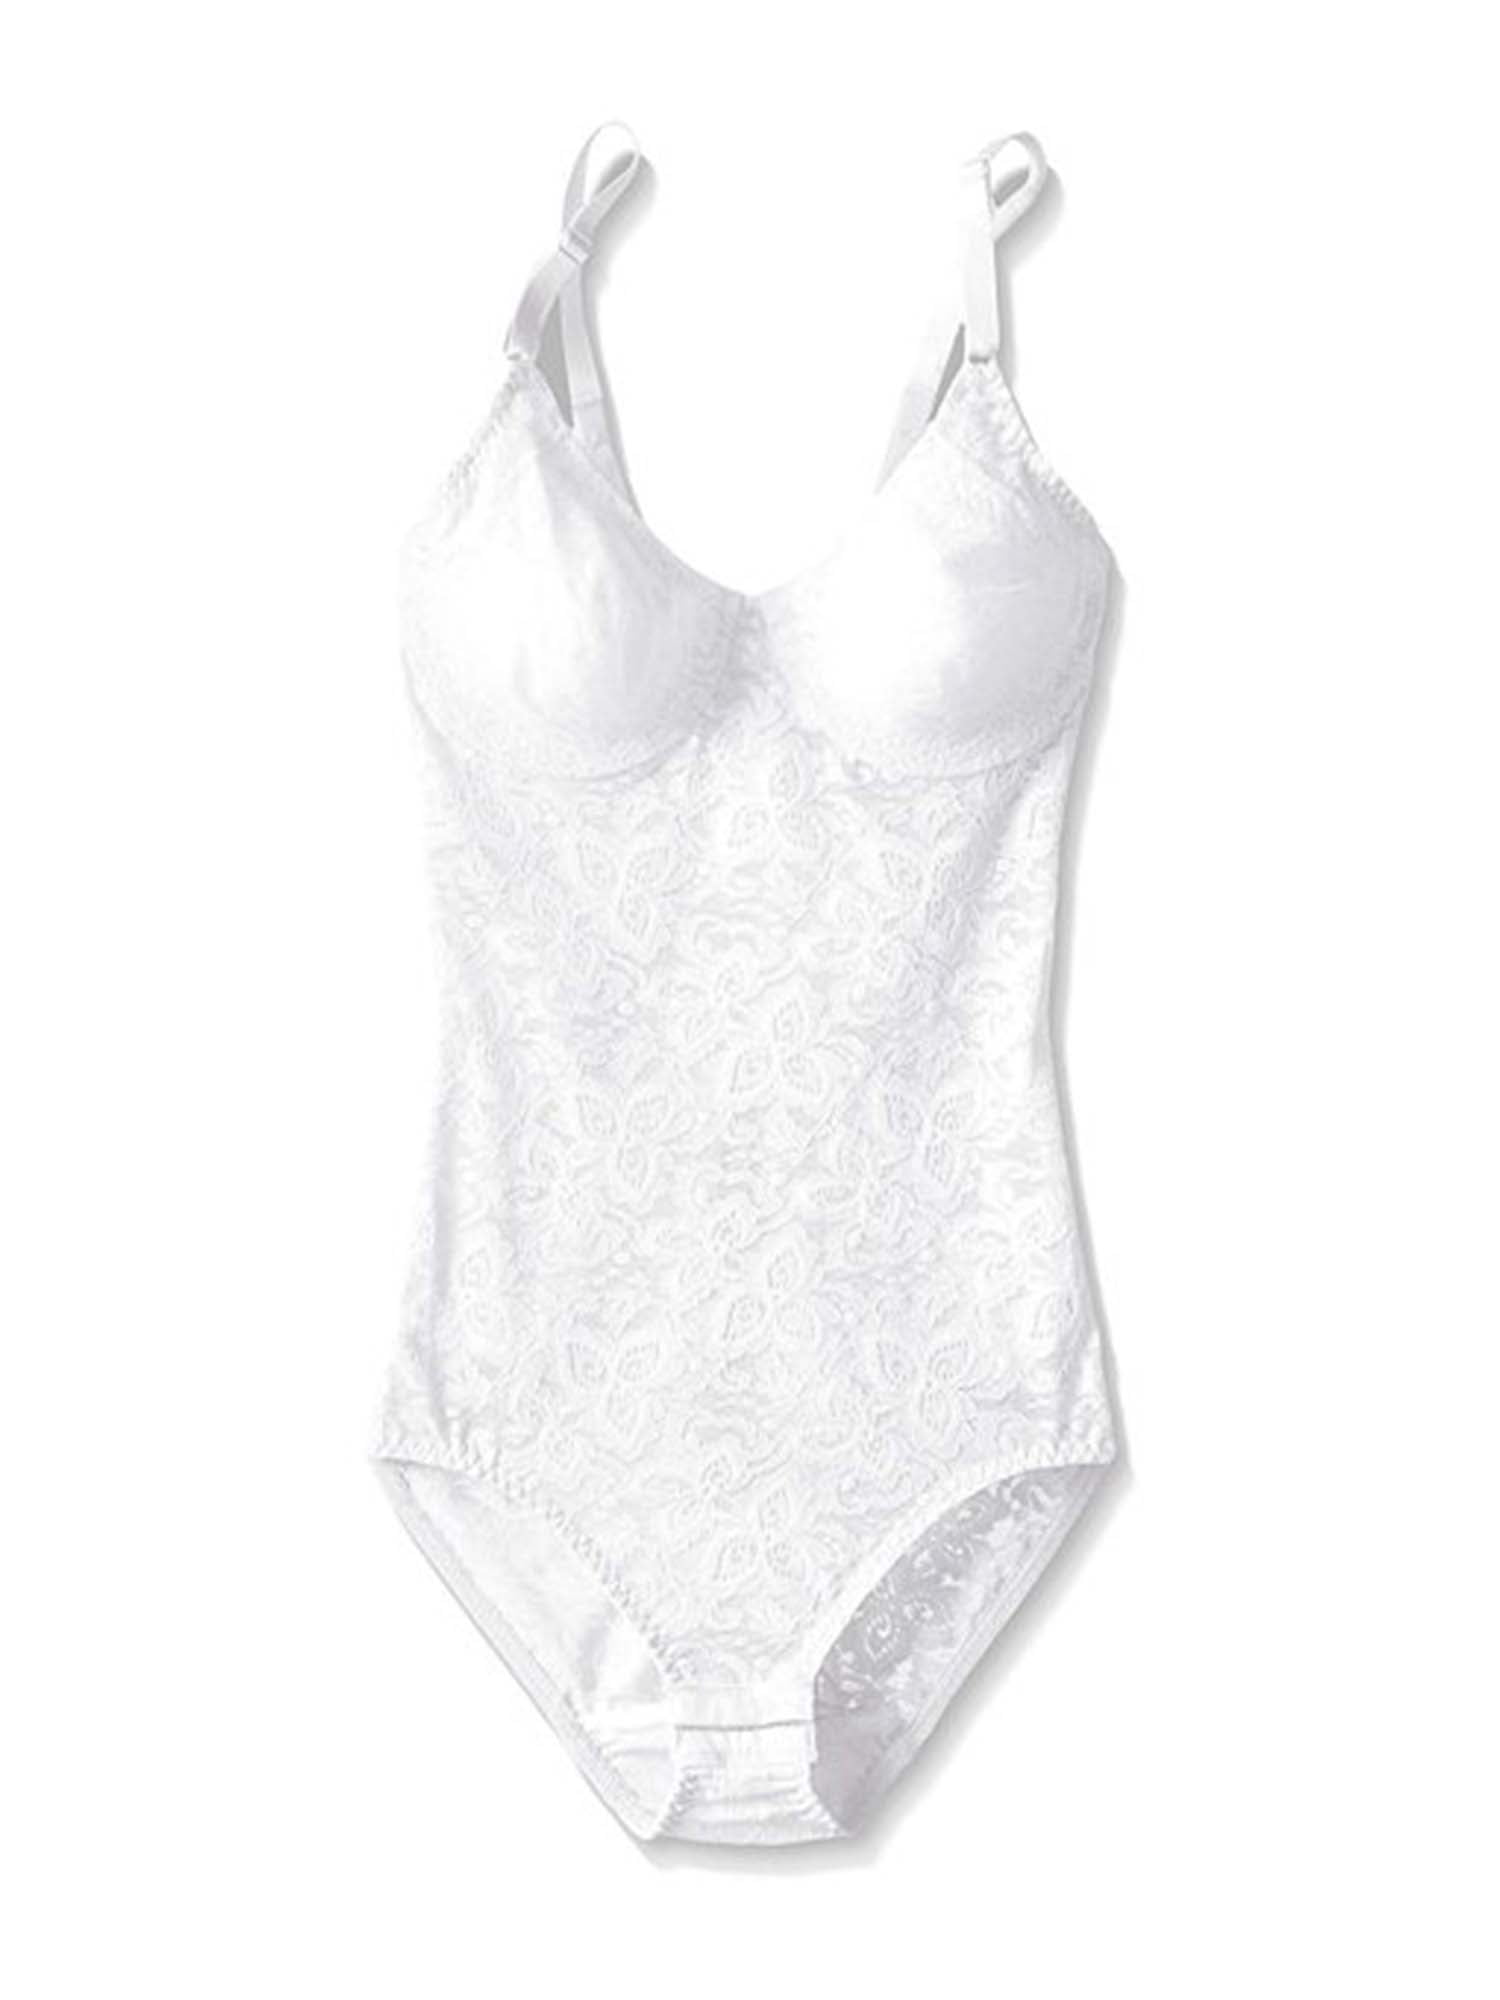 Bali Lace'n Smooth All-In-One Stretch Bodysuit Shapewear - Import It All